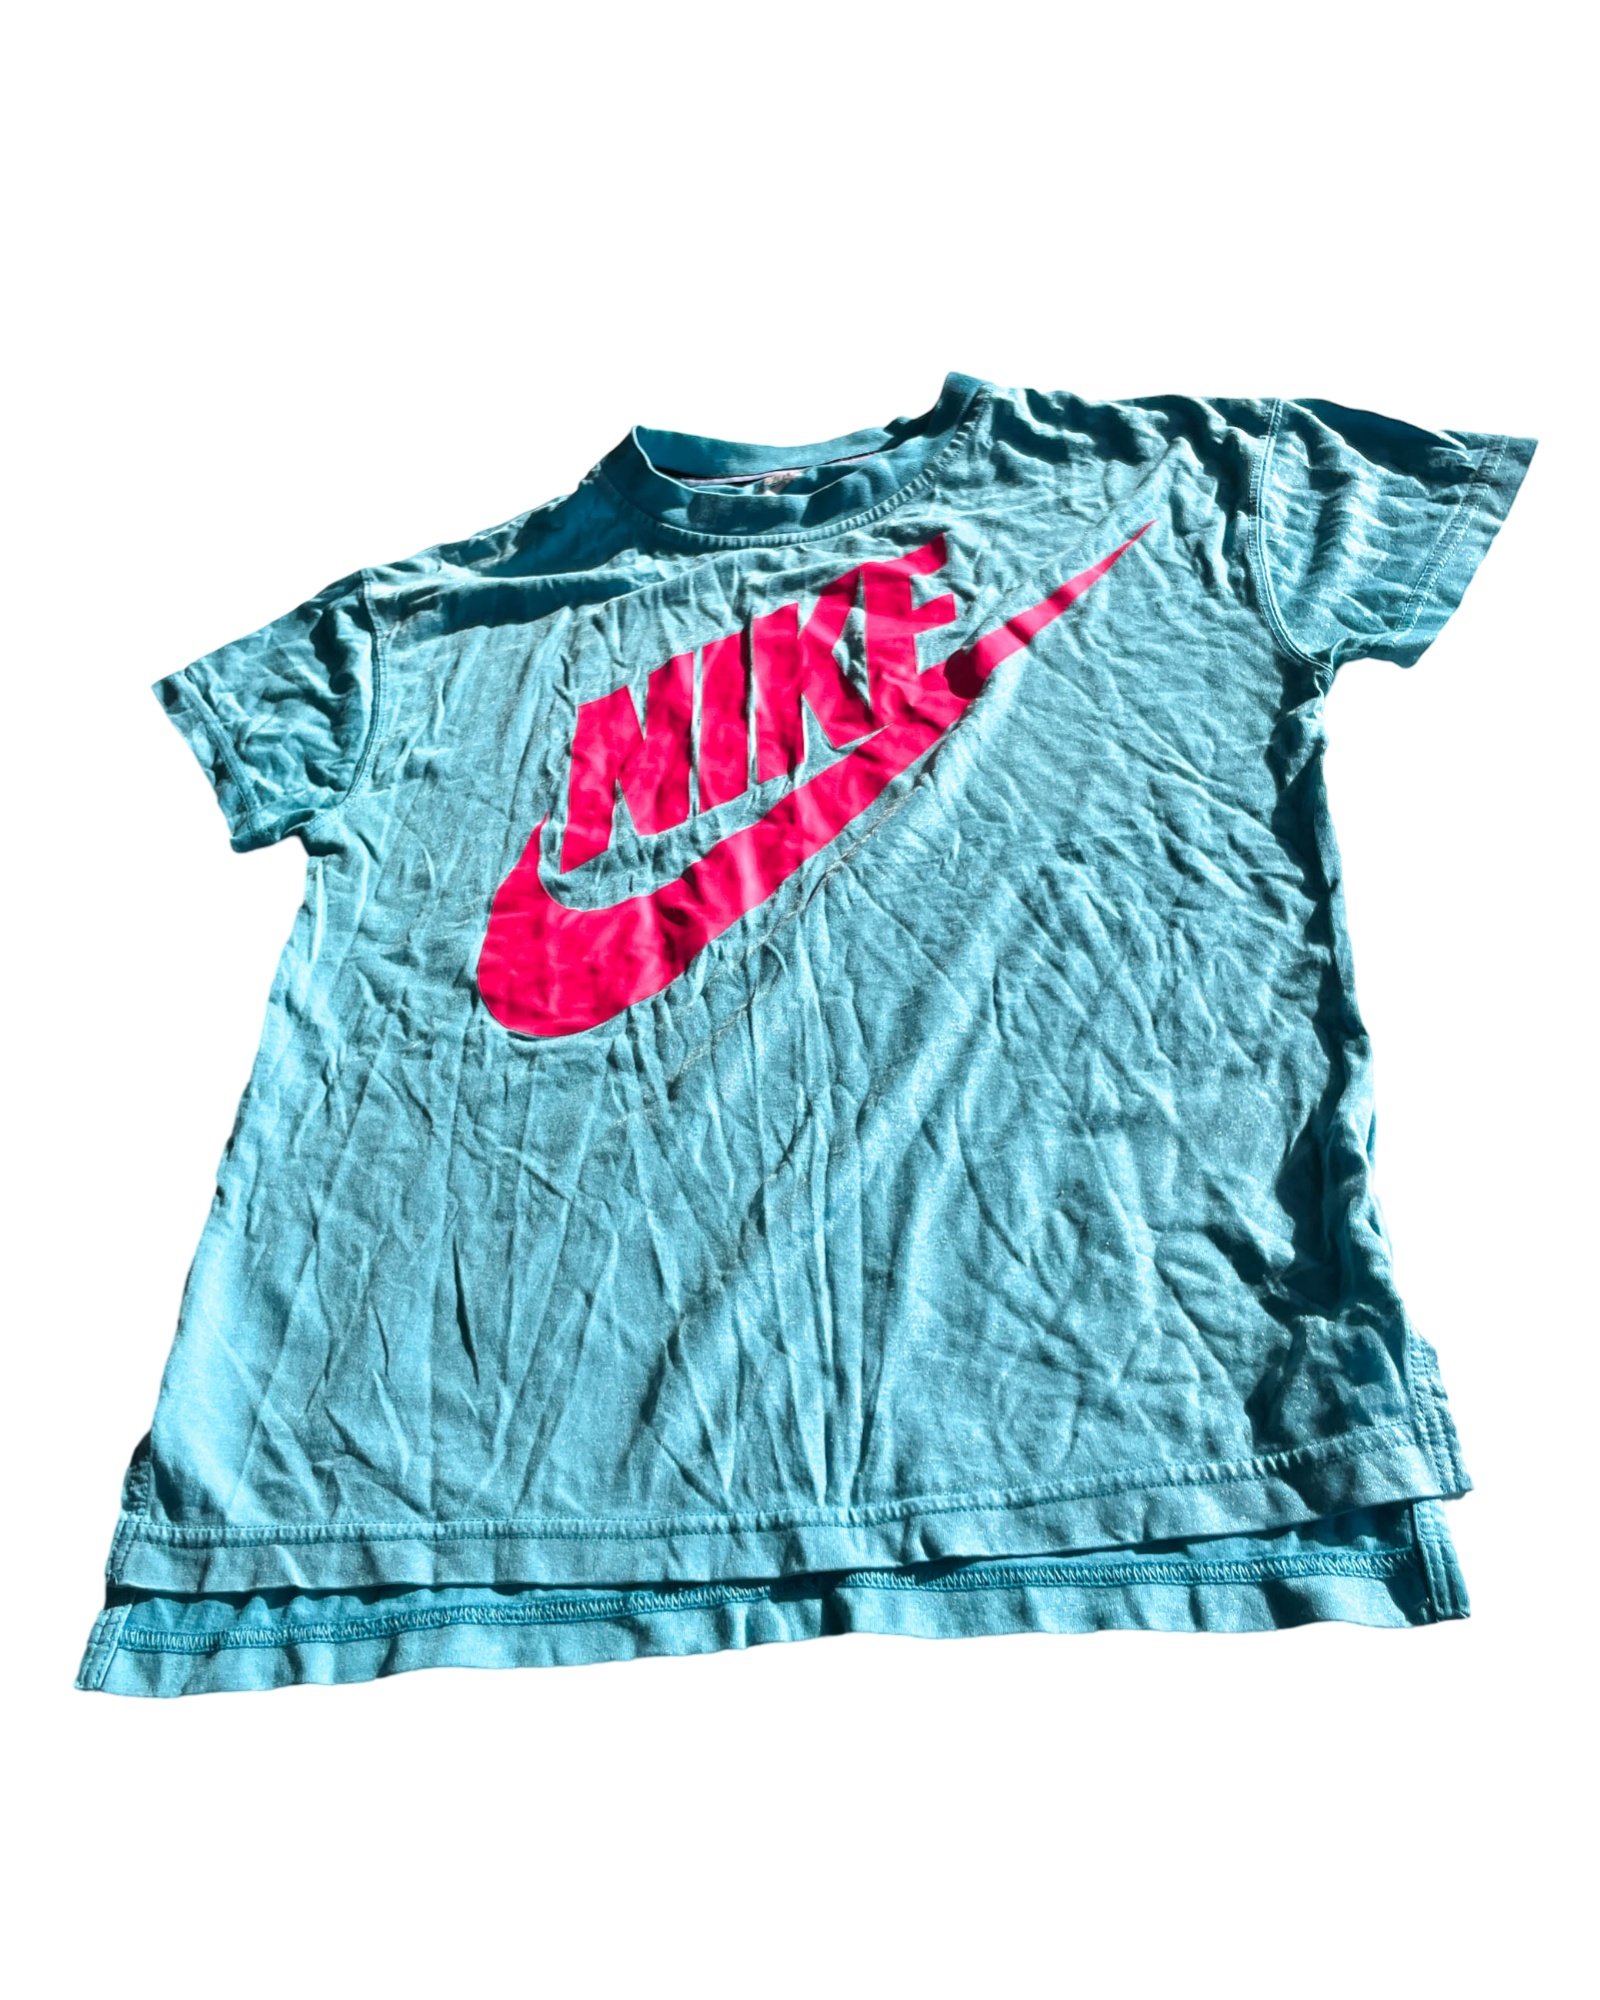 Nike Sportswear Printed Club Tee. In blue and recommended for size S/XS |SKU 5054